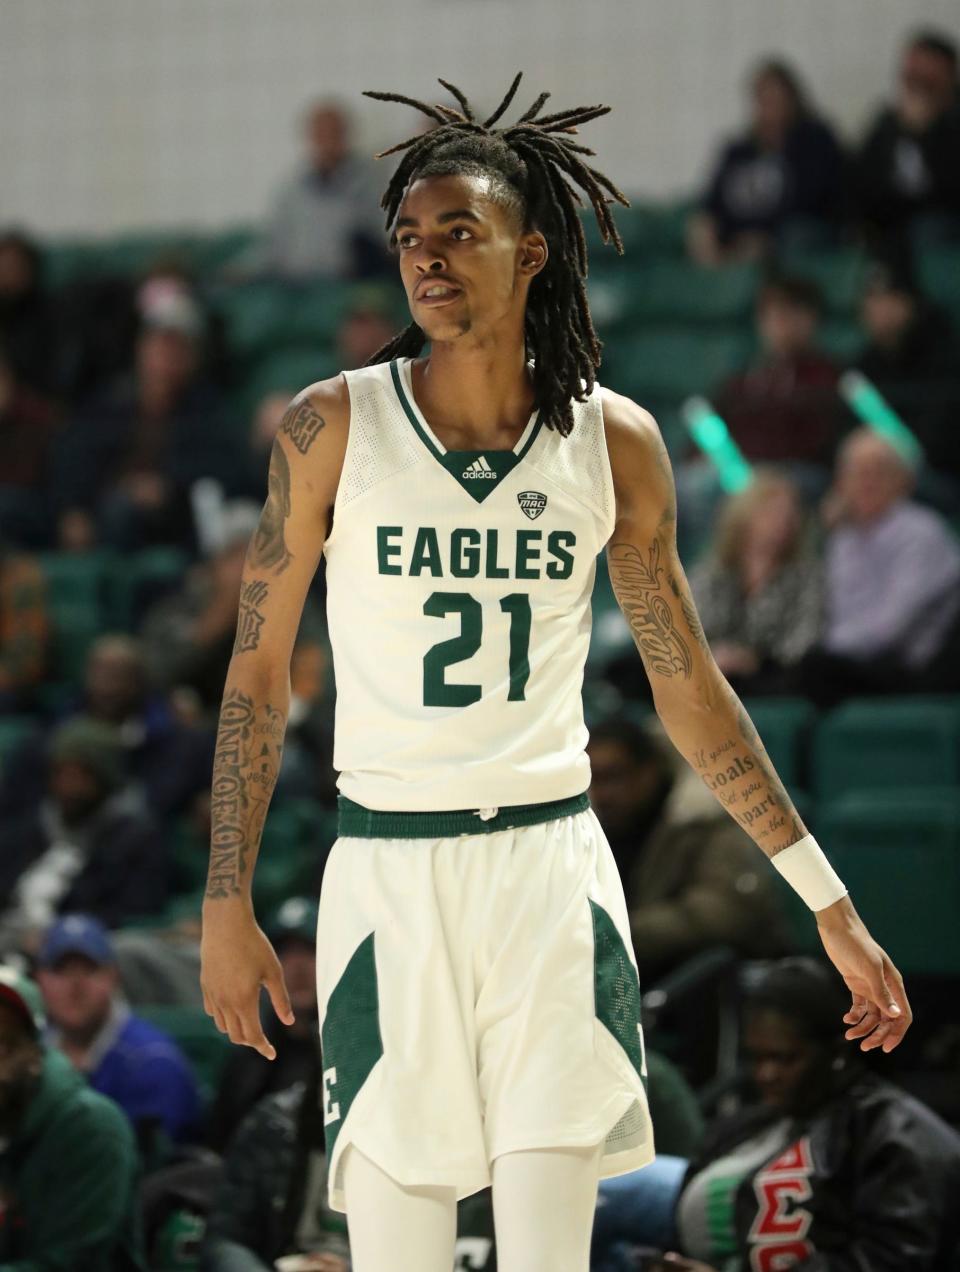 Eastern Michigan Eagles forward Emoni Bates on the floor against the Ohio Bobcats during the first half Tuesday, Jan. 31, 2023 in Ypsilanti.